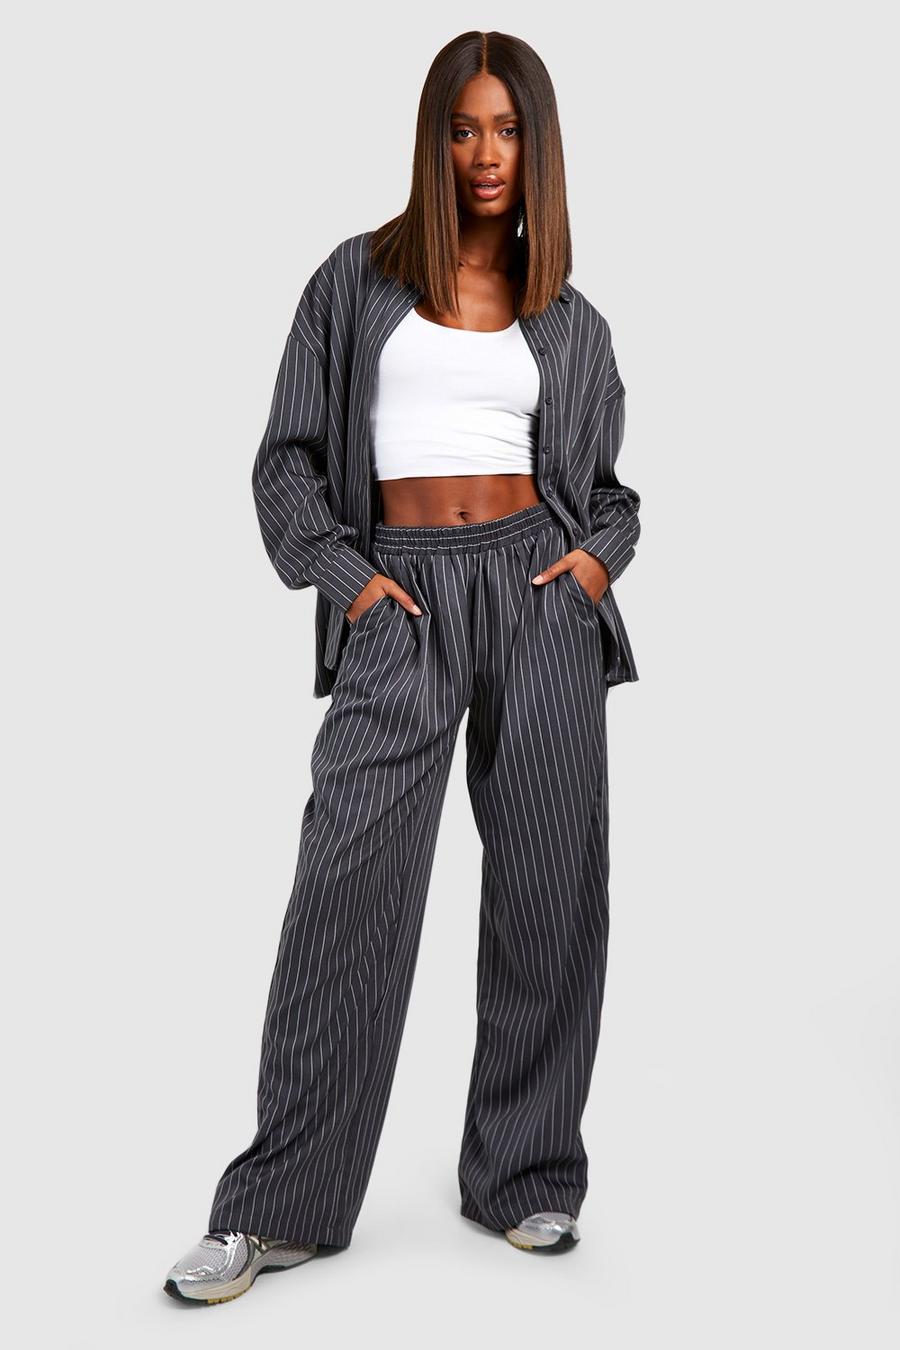 Boss Britches / Women's Clothing / Pants and Capris / Loose Fit Cotton Pants  / Wide Leg Trousers / Bohemian Style Pants / Funky Pants/ Gray -  Canada